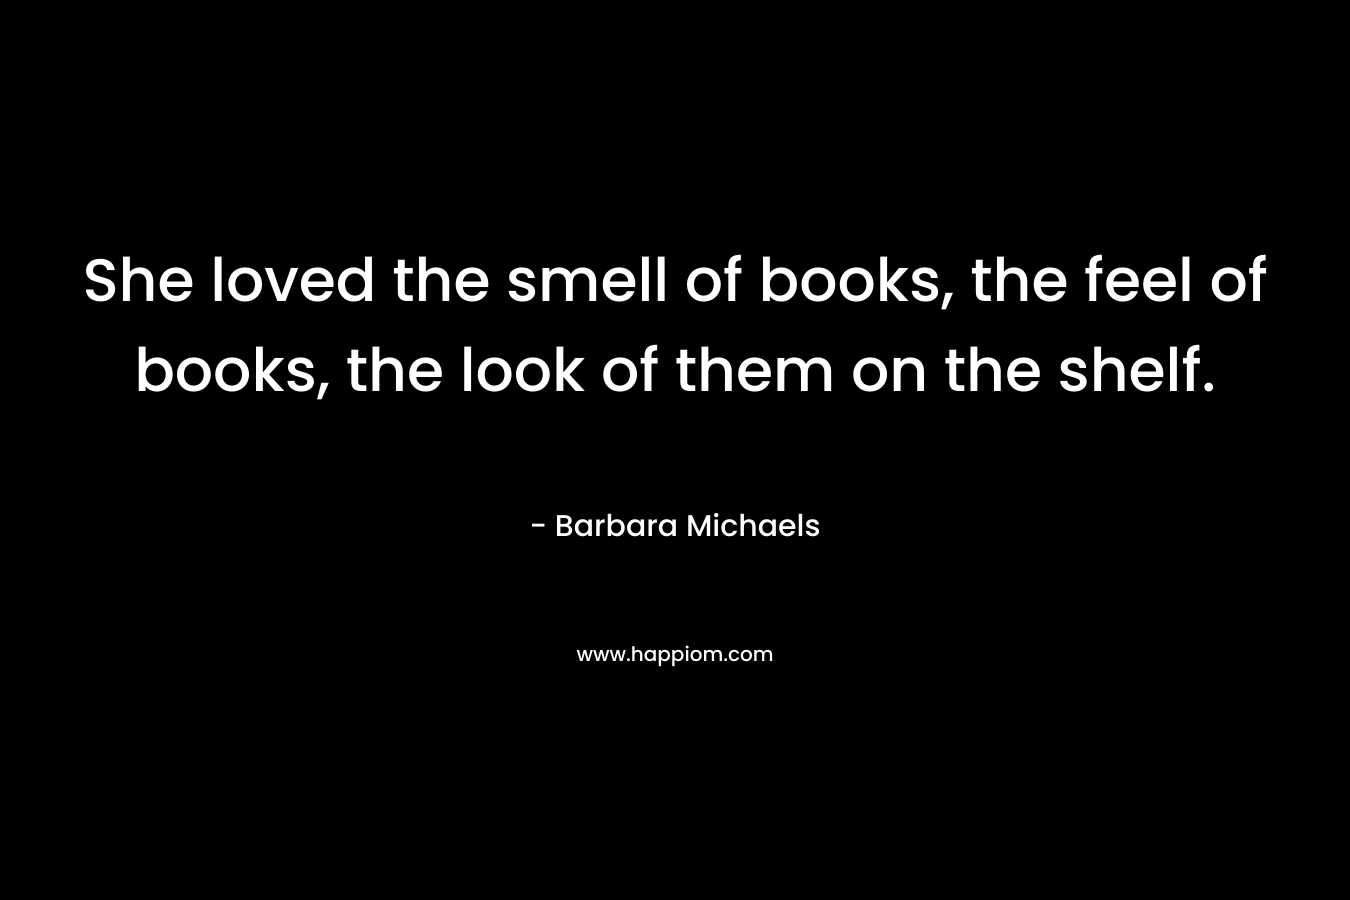 She loved the smell of books, the feel of books, the look of them on the shelf.